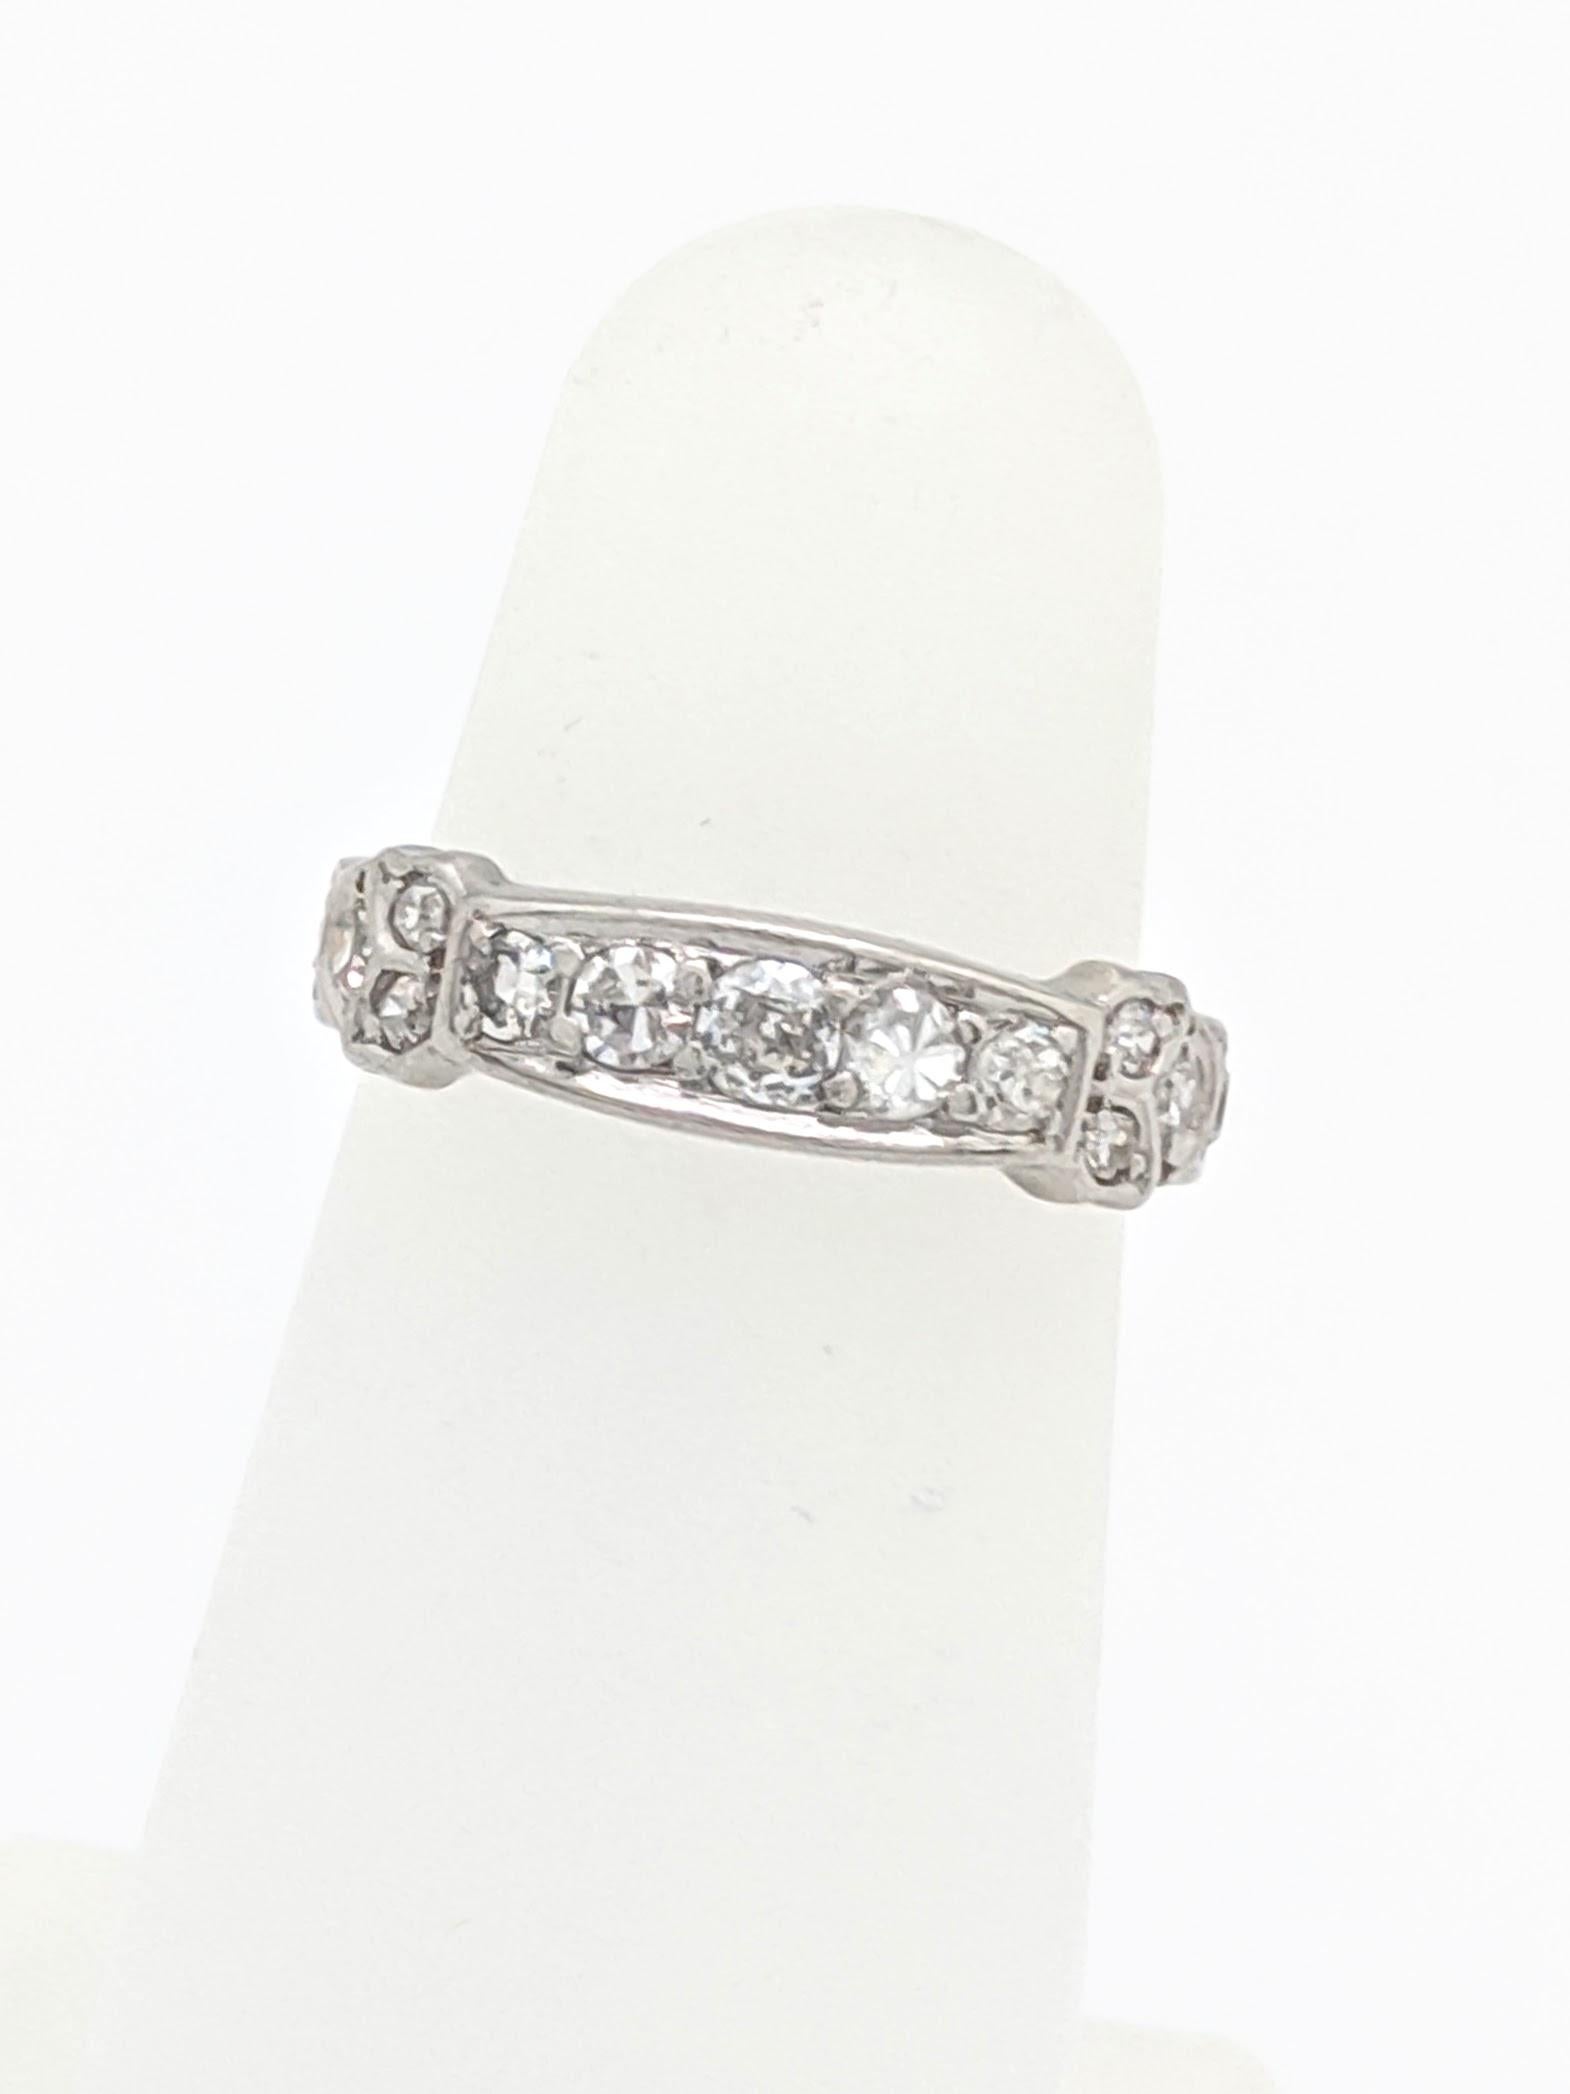 14K White Gold Estate Diamond Stackable Anniversary Wedding Band Ring

You are viewing a Beautiful Diamond Stackable Band. This ring is crafted from 14k white gold and weighs 3.1 grams. It features (13) natural round single cut diamonds for an